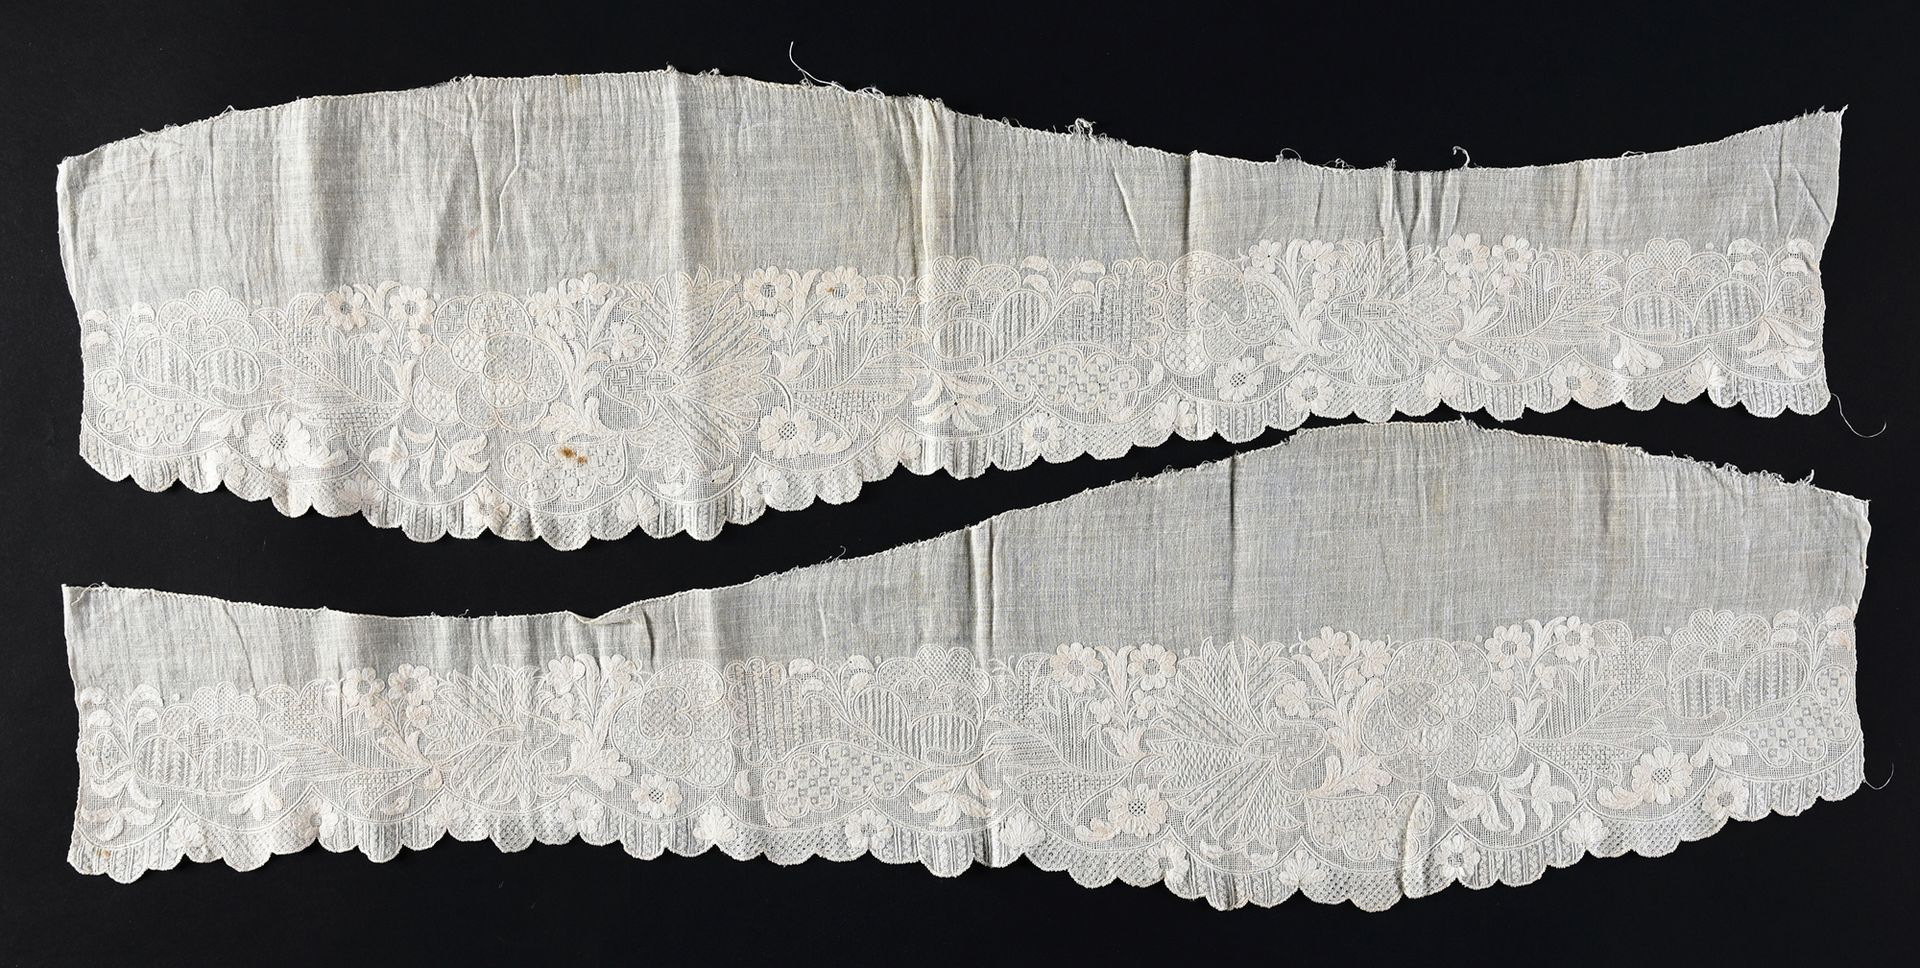 Null Engageantes, Dresden embroidery, Germany, mid-18th century.

A pair of fine&hellip;